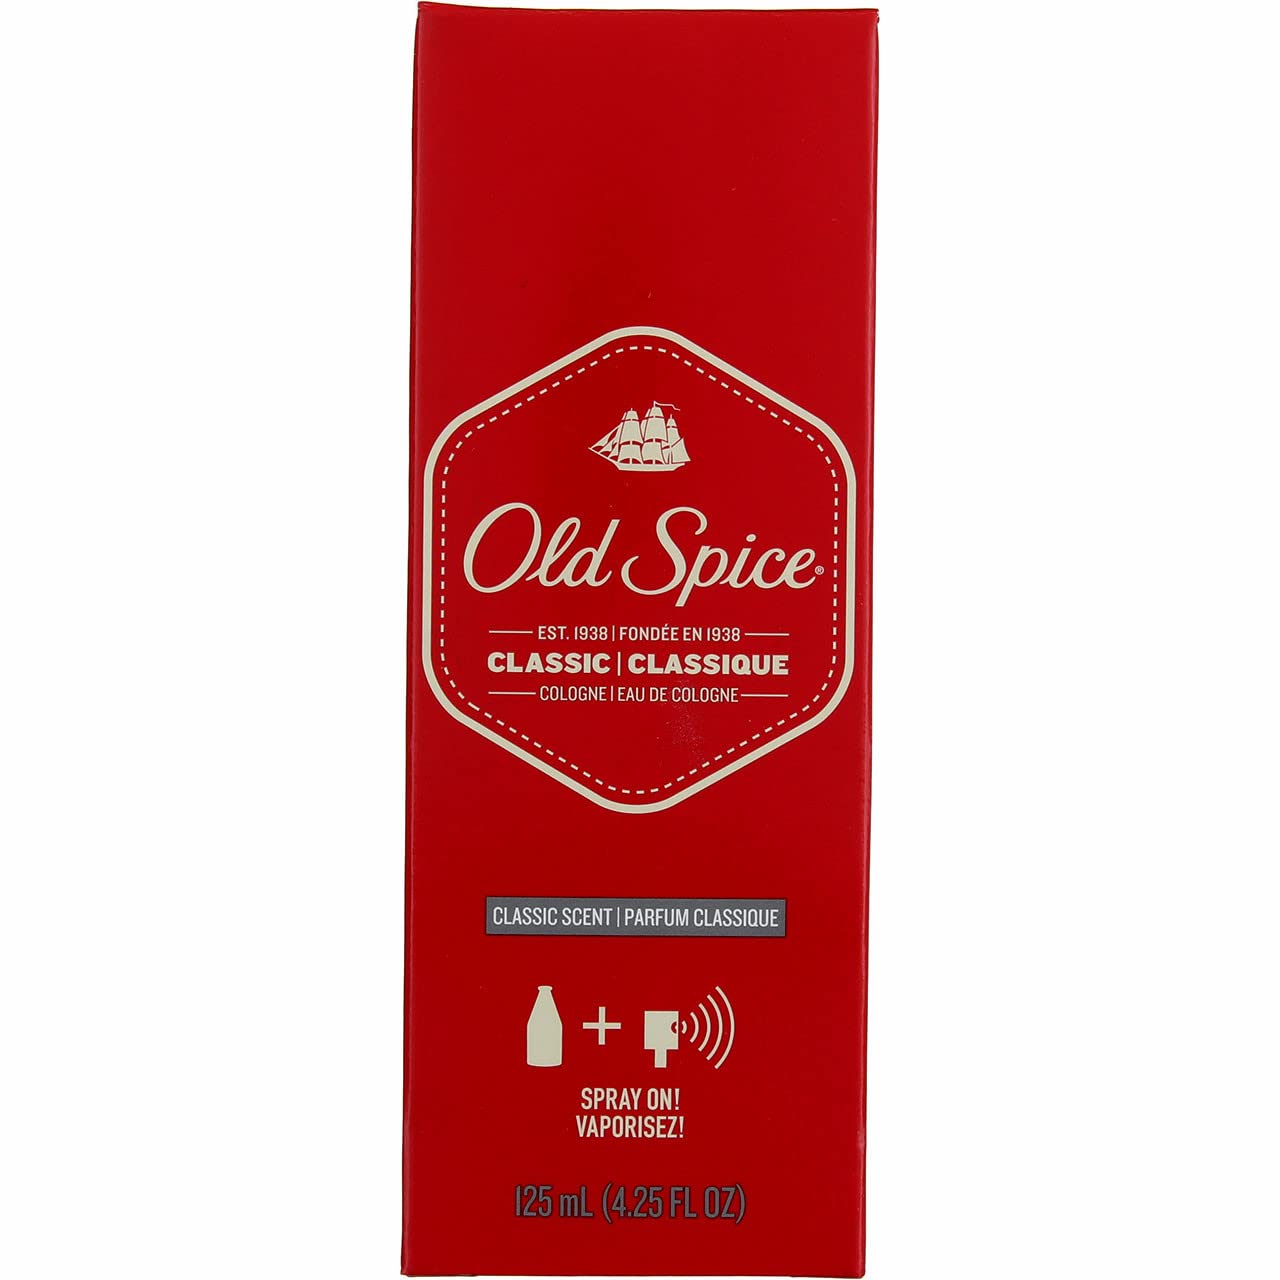 Old Spice Classic Cologne Spray - 4.25 Ounce (Value [...]